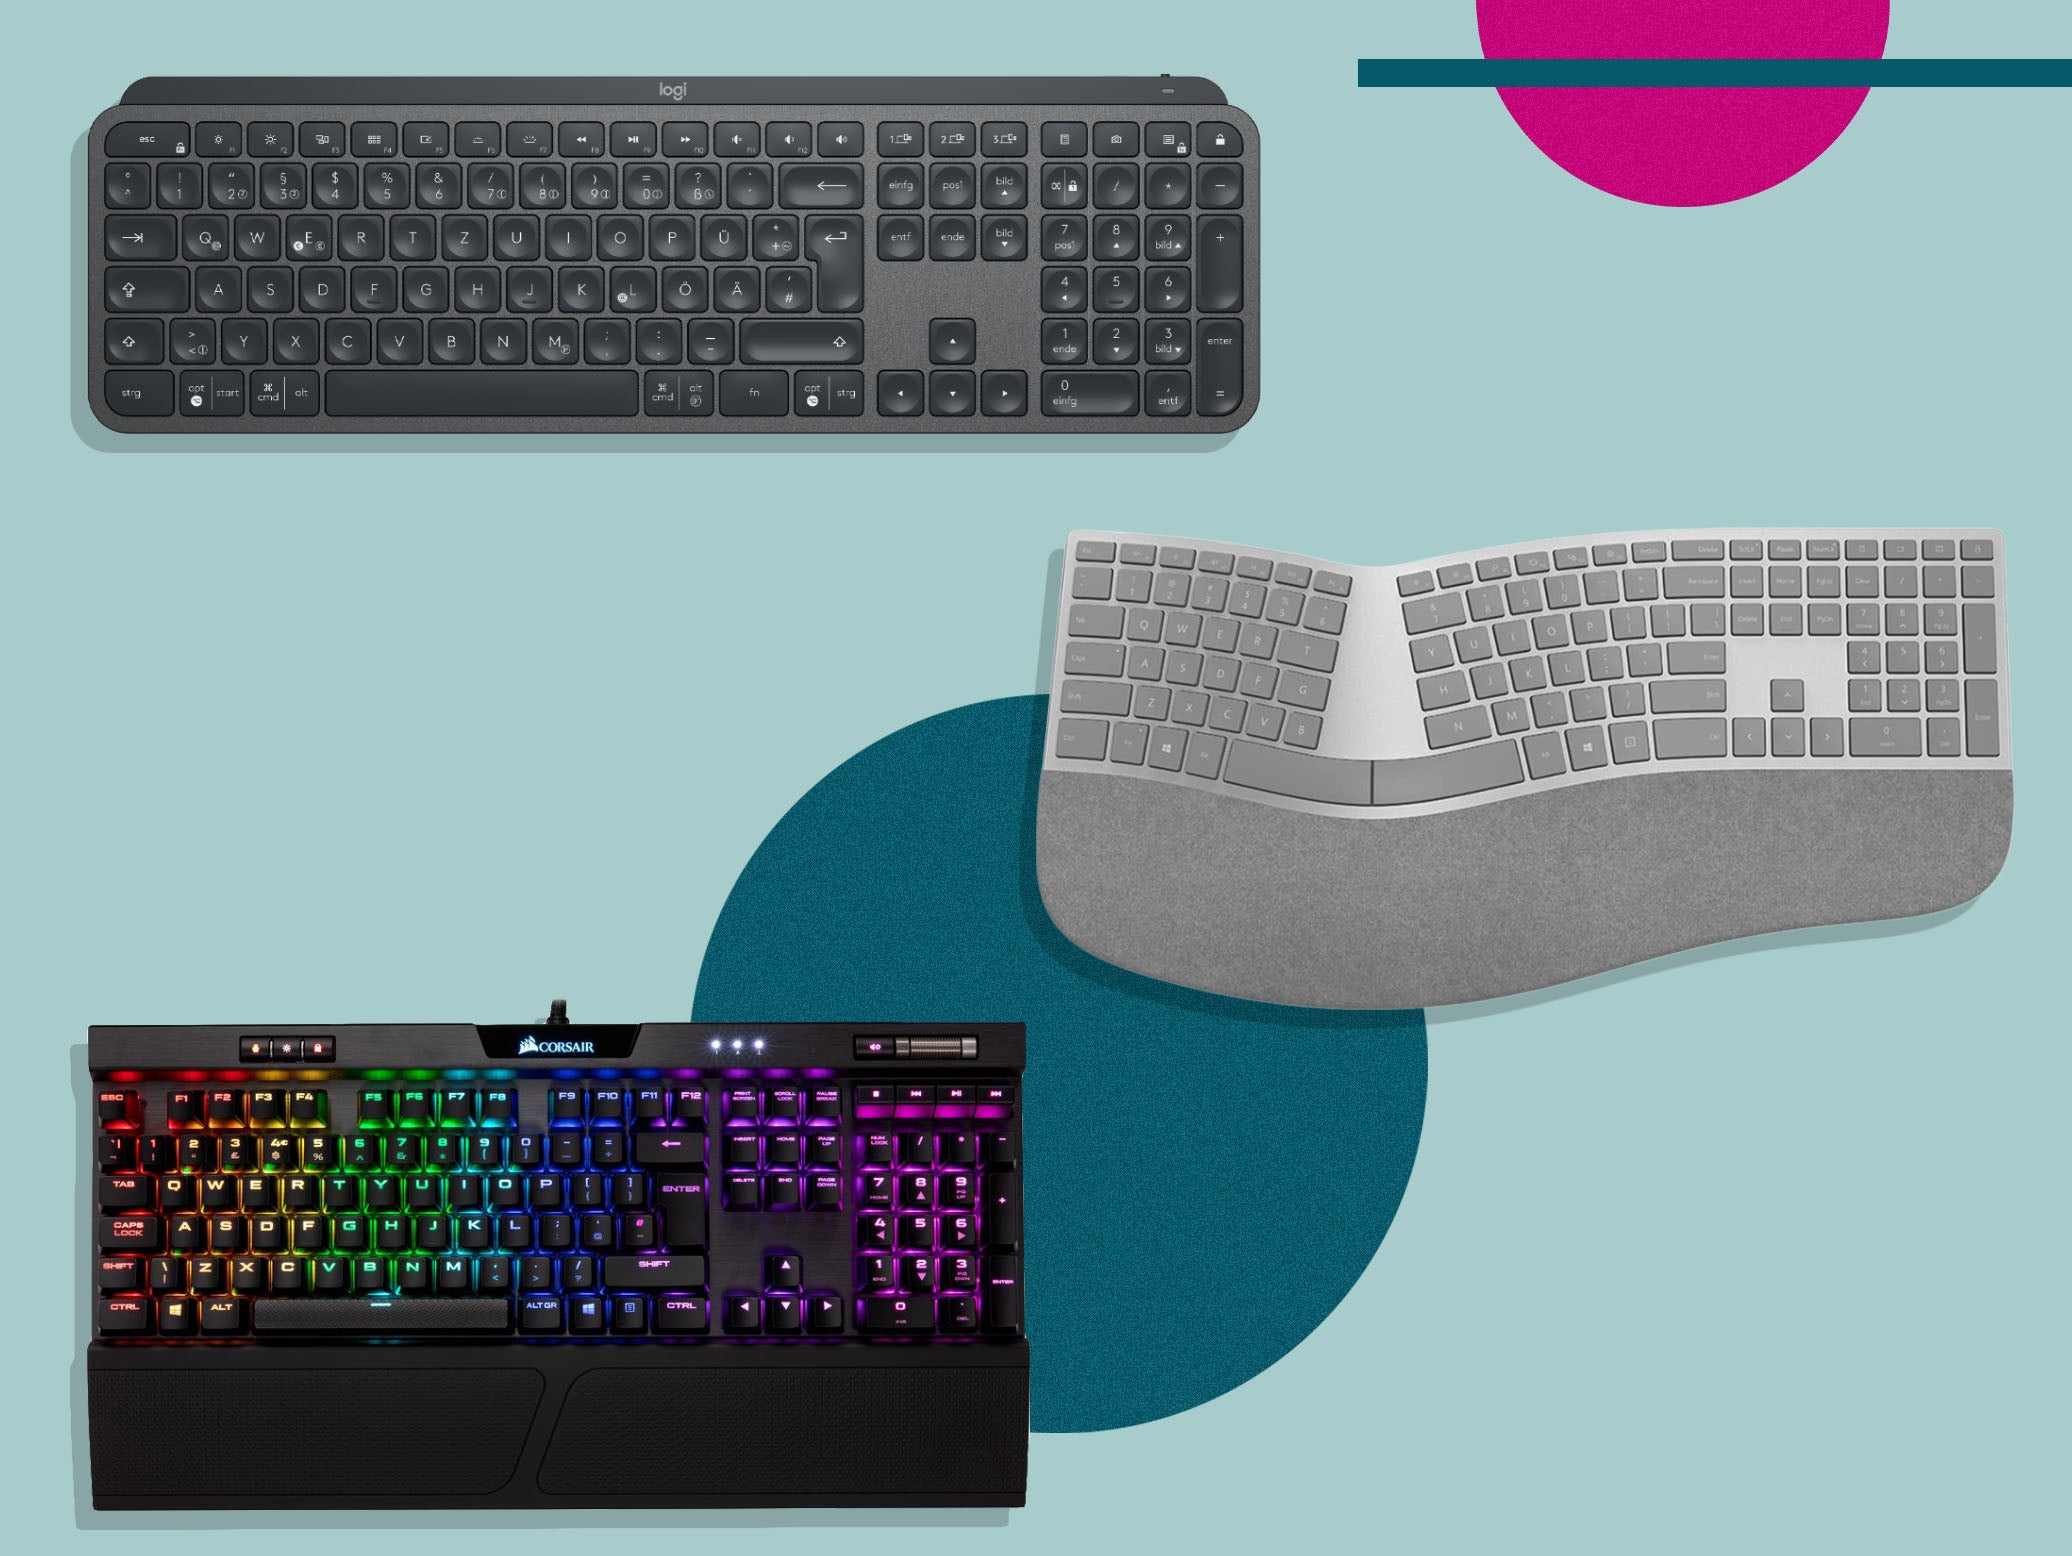 We tested the models on everything from office work to gaming